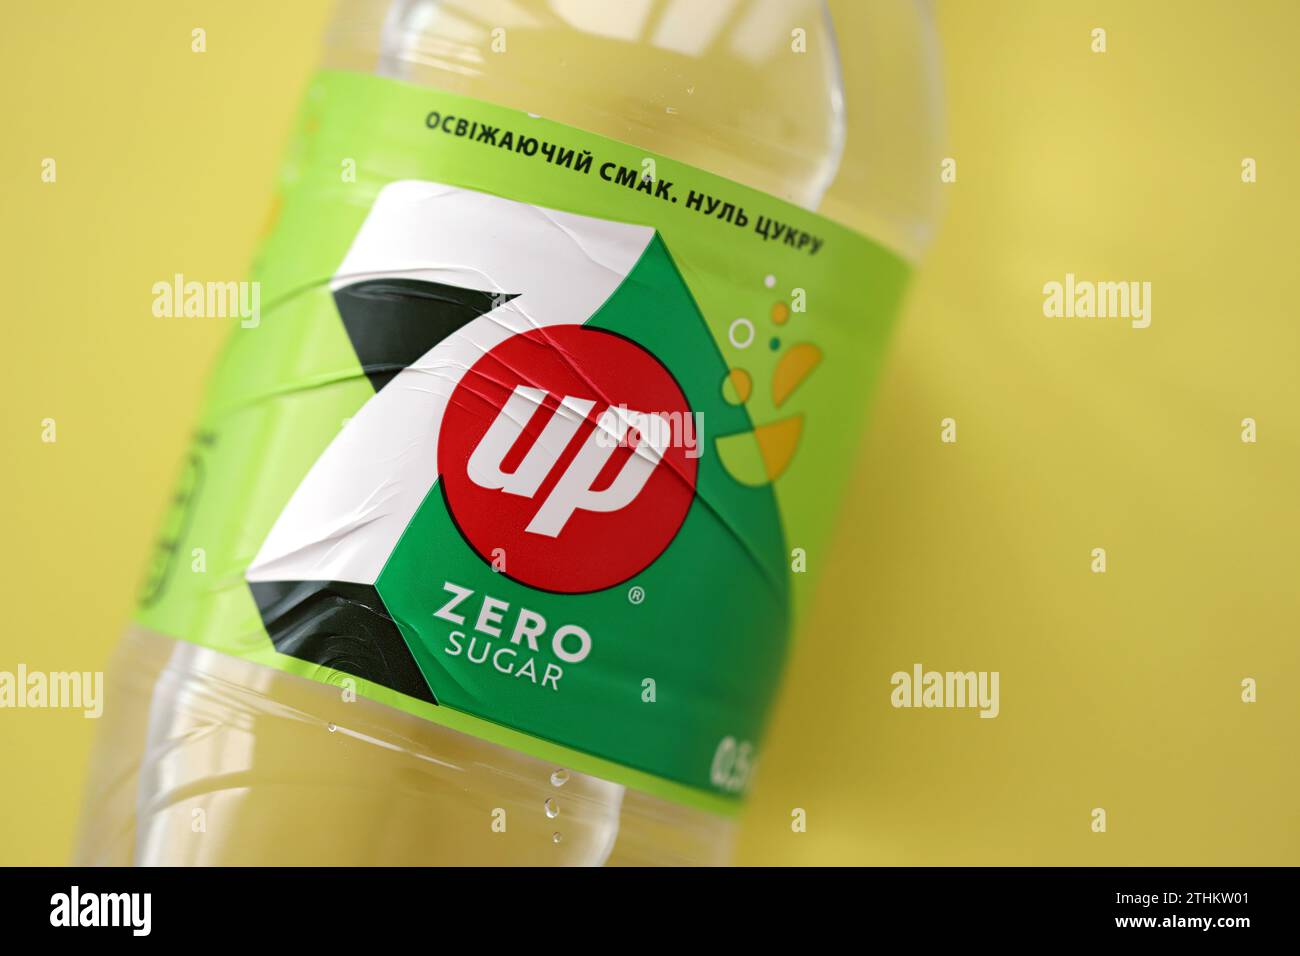 https://c8.alamy.com/comp/2THKW01/kyiv-ukraine-october-31-2023-7up-05-liter-zero-sugar-plastic-bottle-seven-up-owned-by-keurig-dr-pepper-although-the-beverage-is-internationally-distributed-by-pepsico-2THKW01.jpg